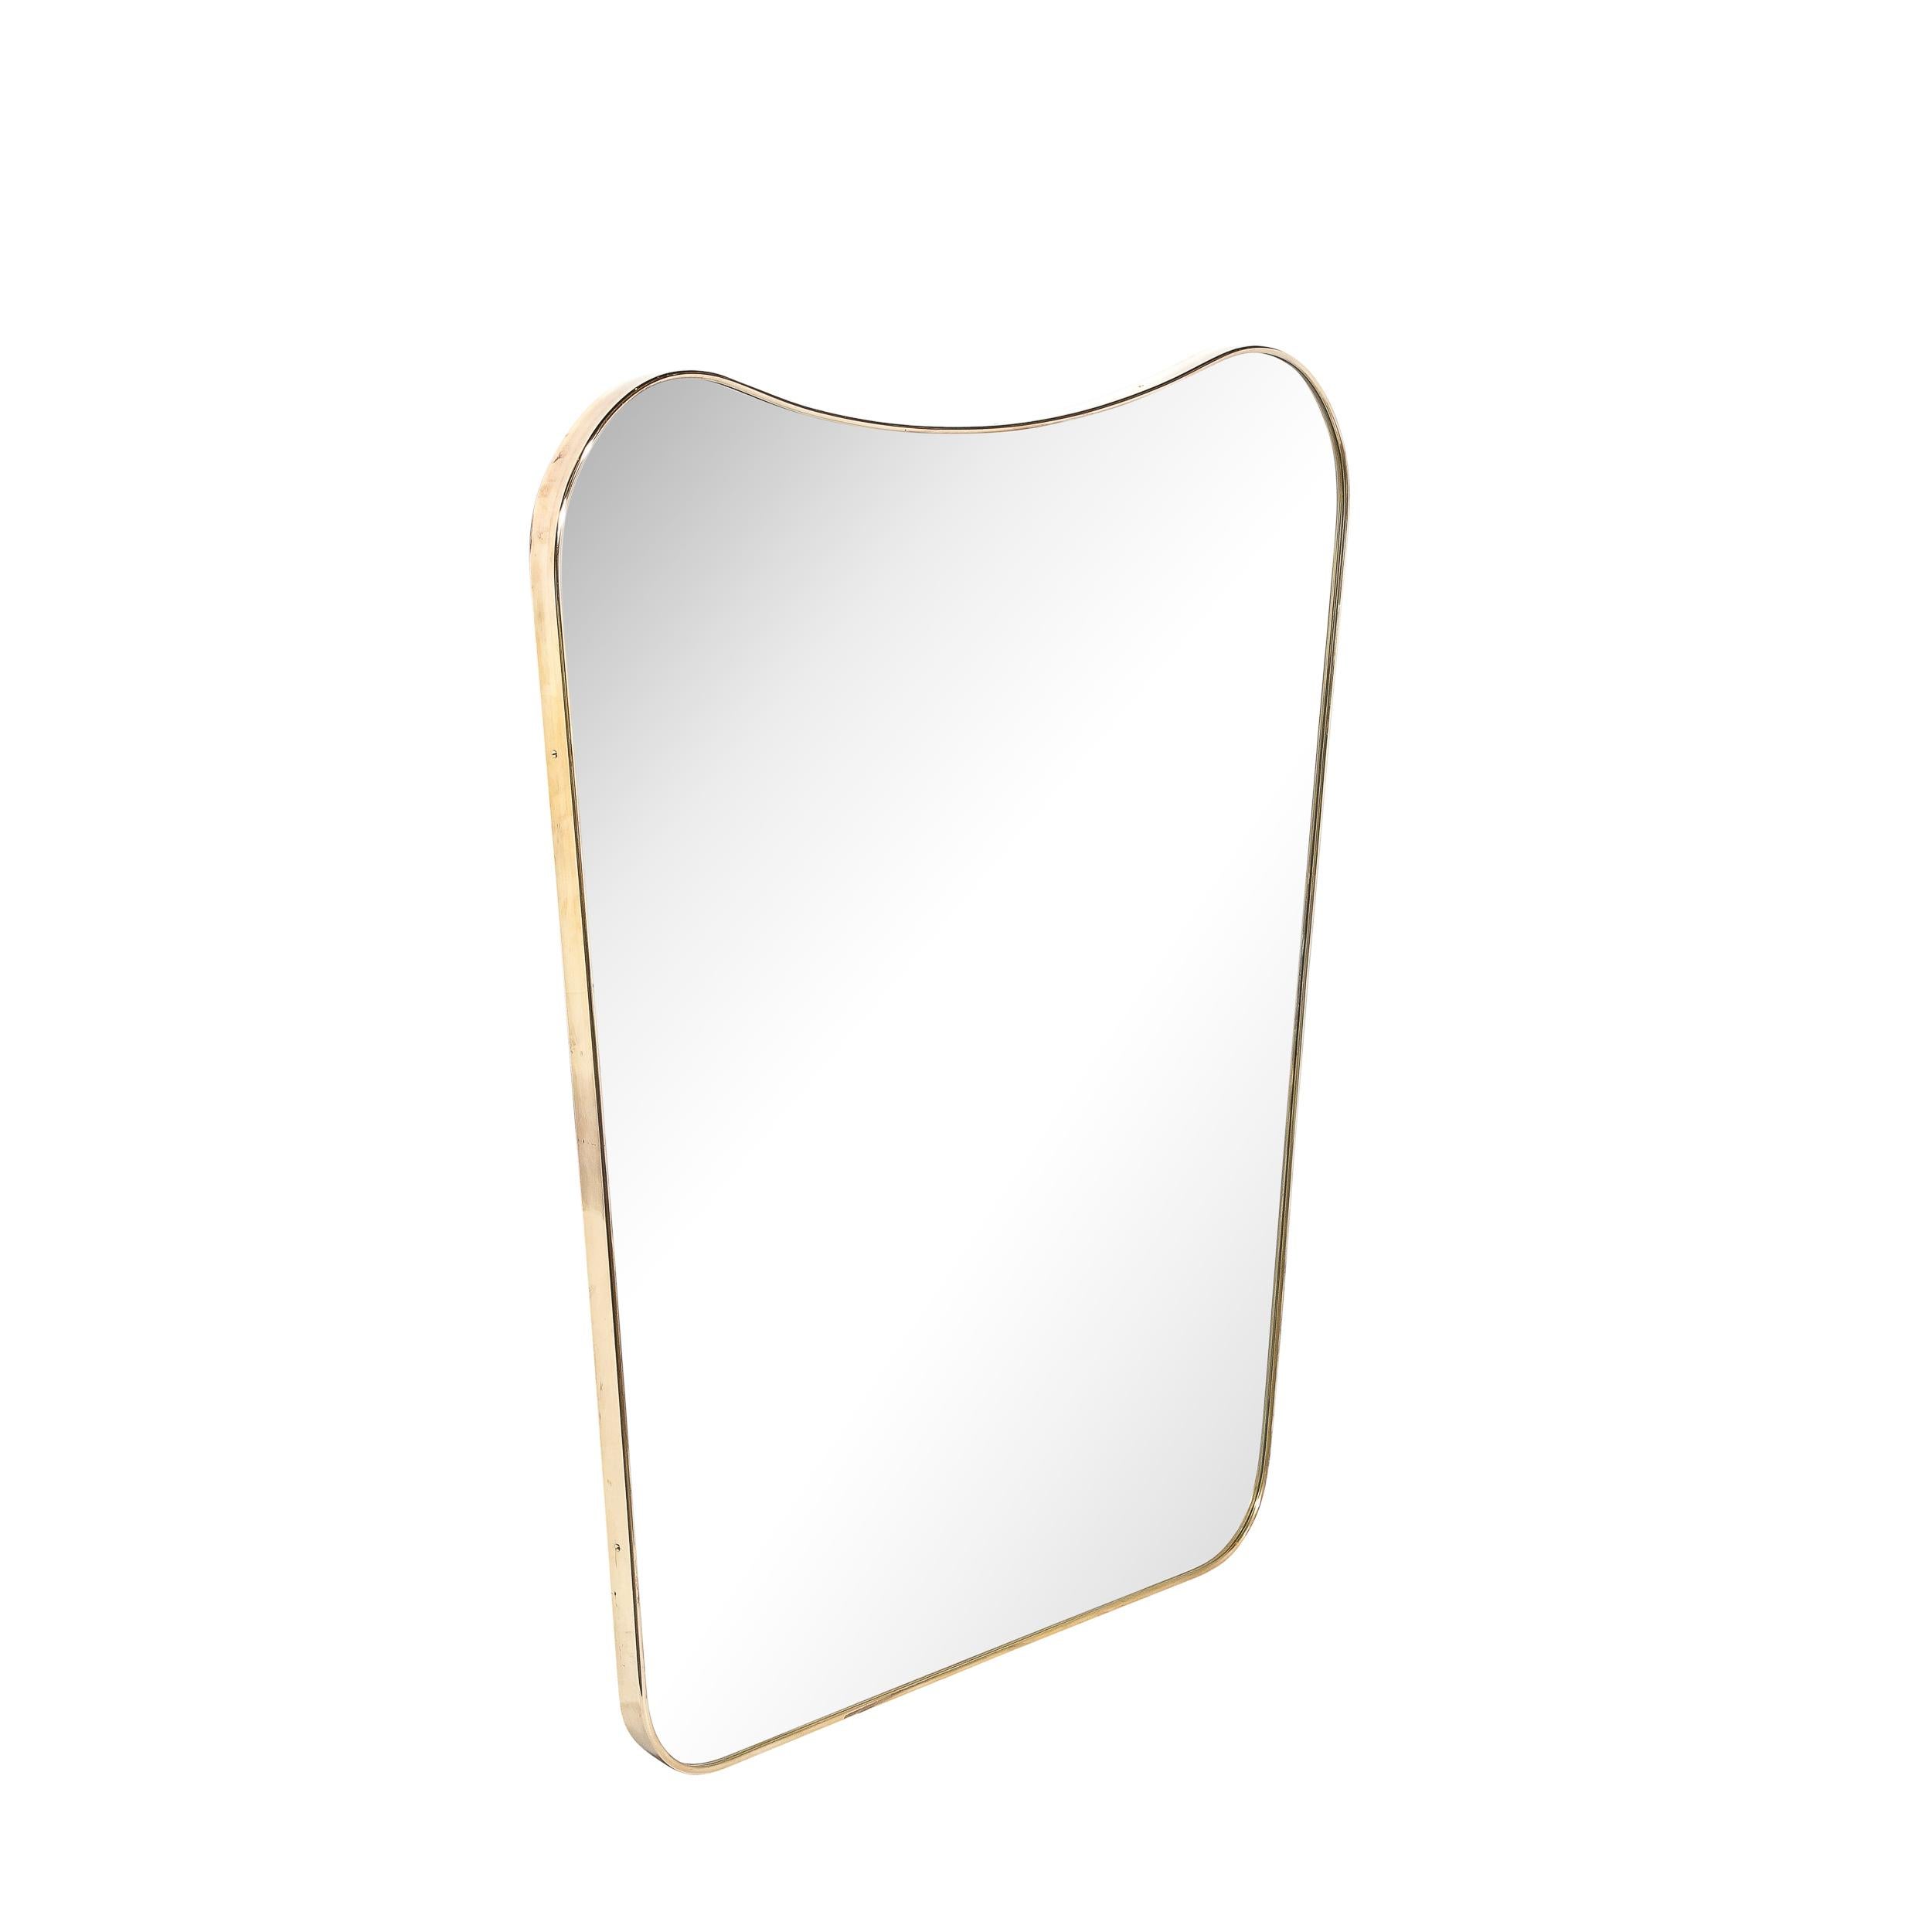 This lovely Mid-Century Modernist Shield Form Polished Brass Wrapped Mirror Originates from Italy, Circa 1950. Features a curvilinear heraldic shield form profile with raised & rounded top corners, well proportioned and rendered in remarkably high